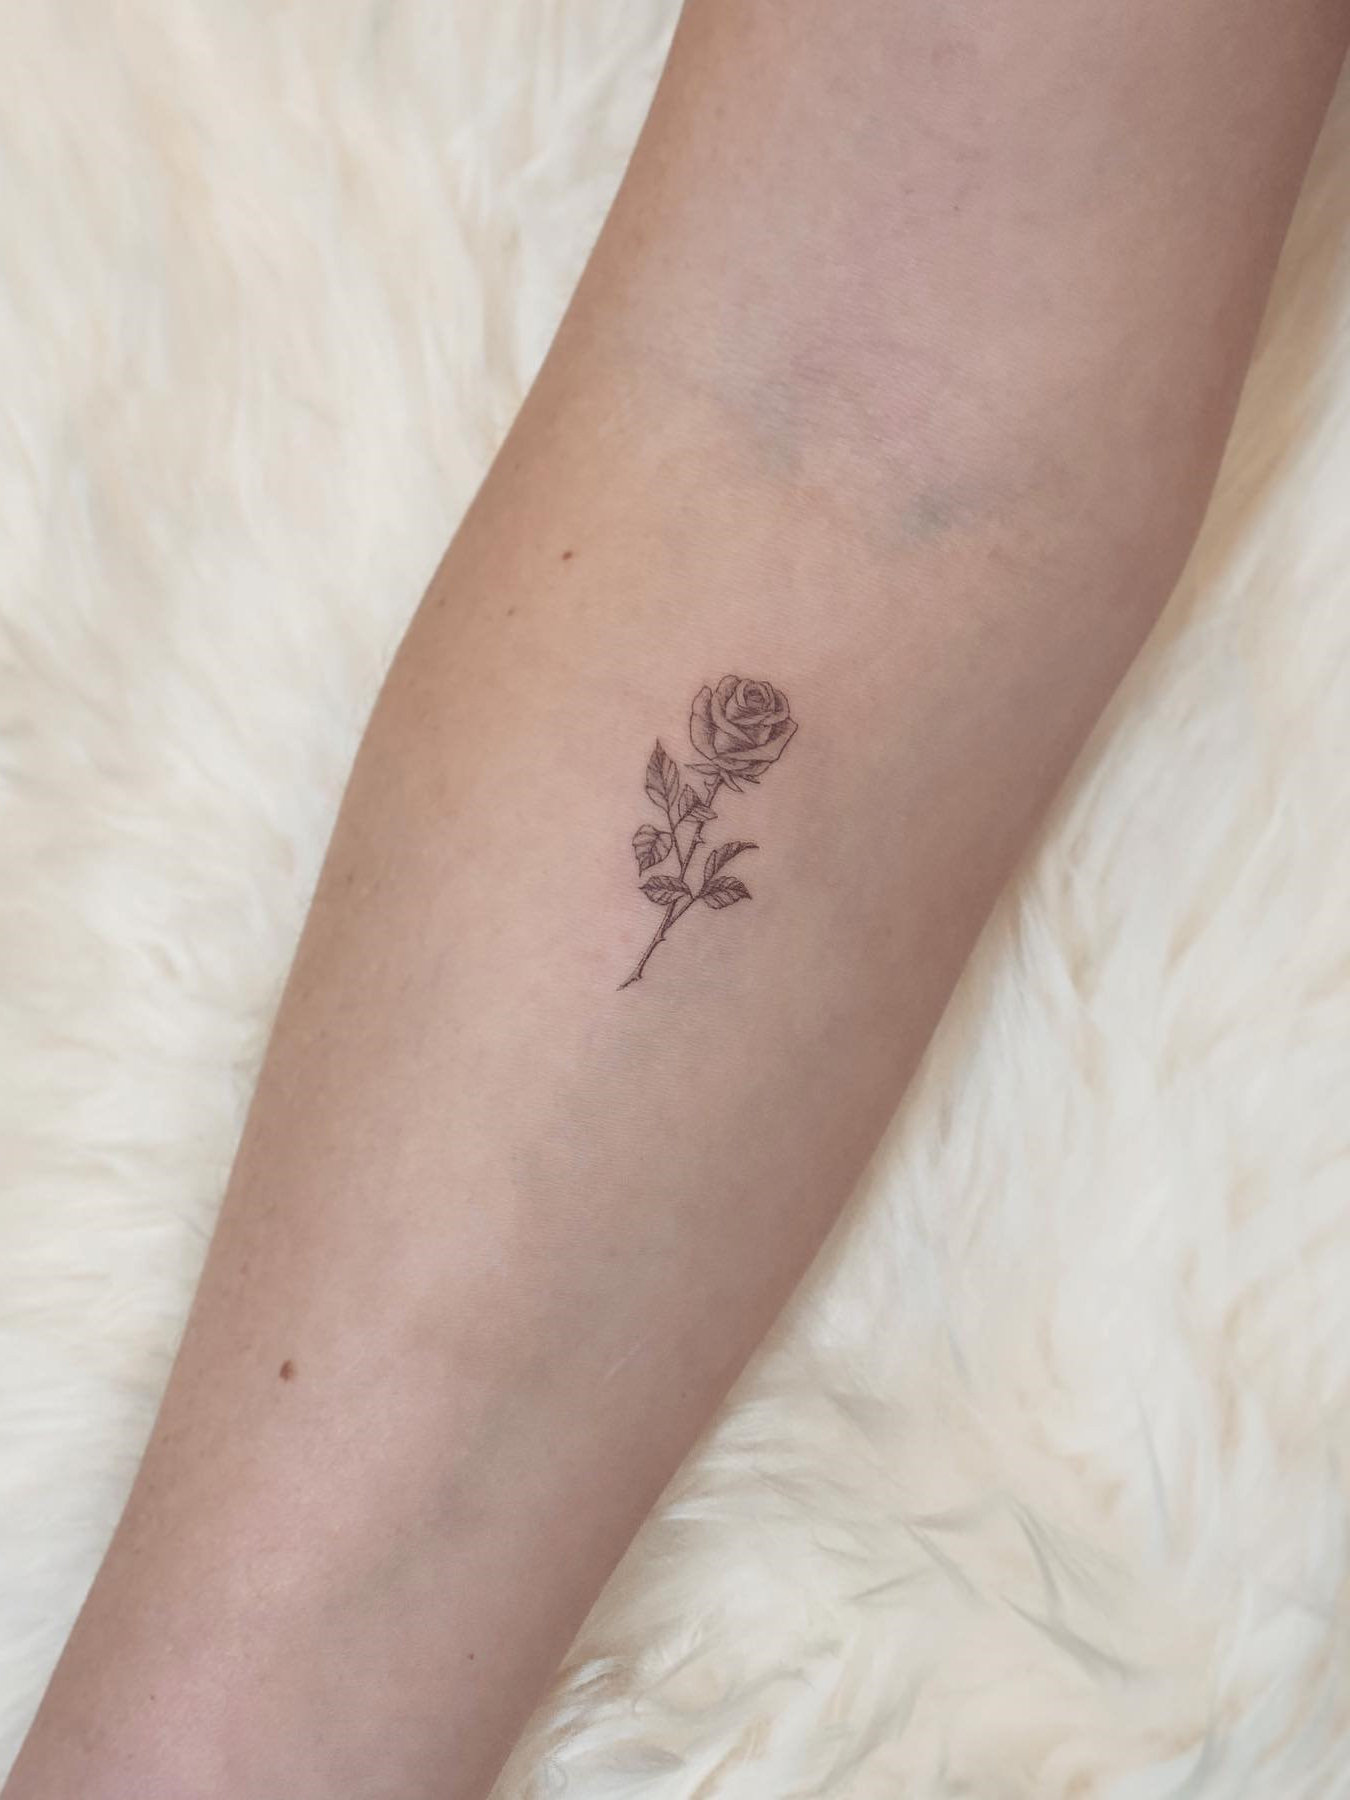 Inner Arm Tattoos for Females, floral tattoo designs